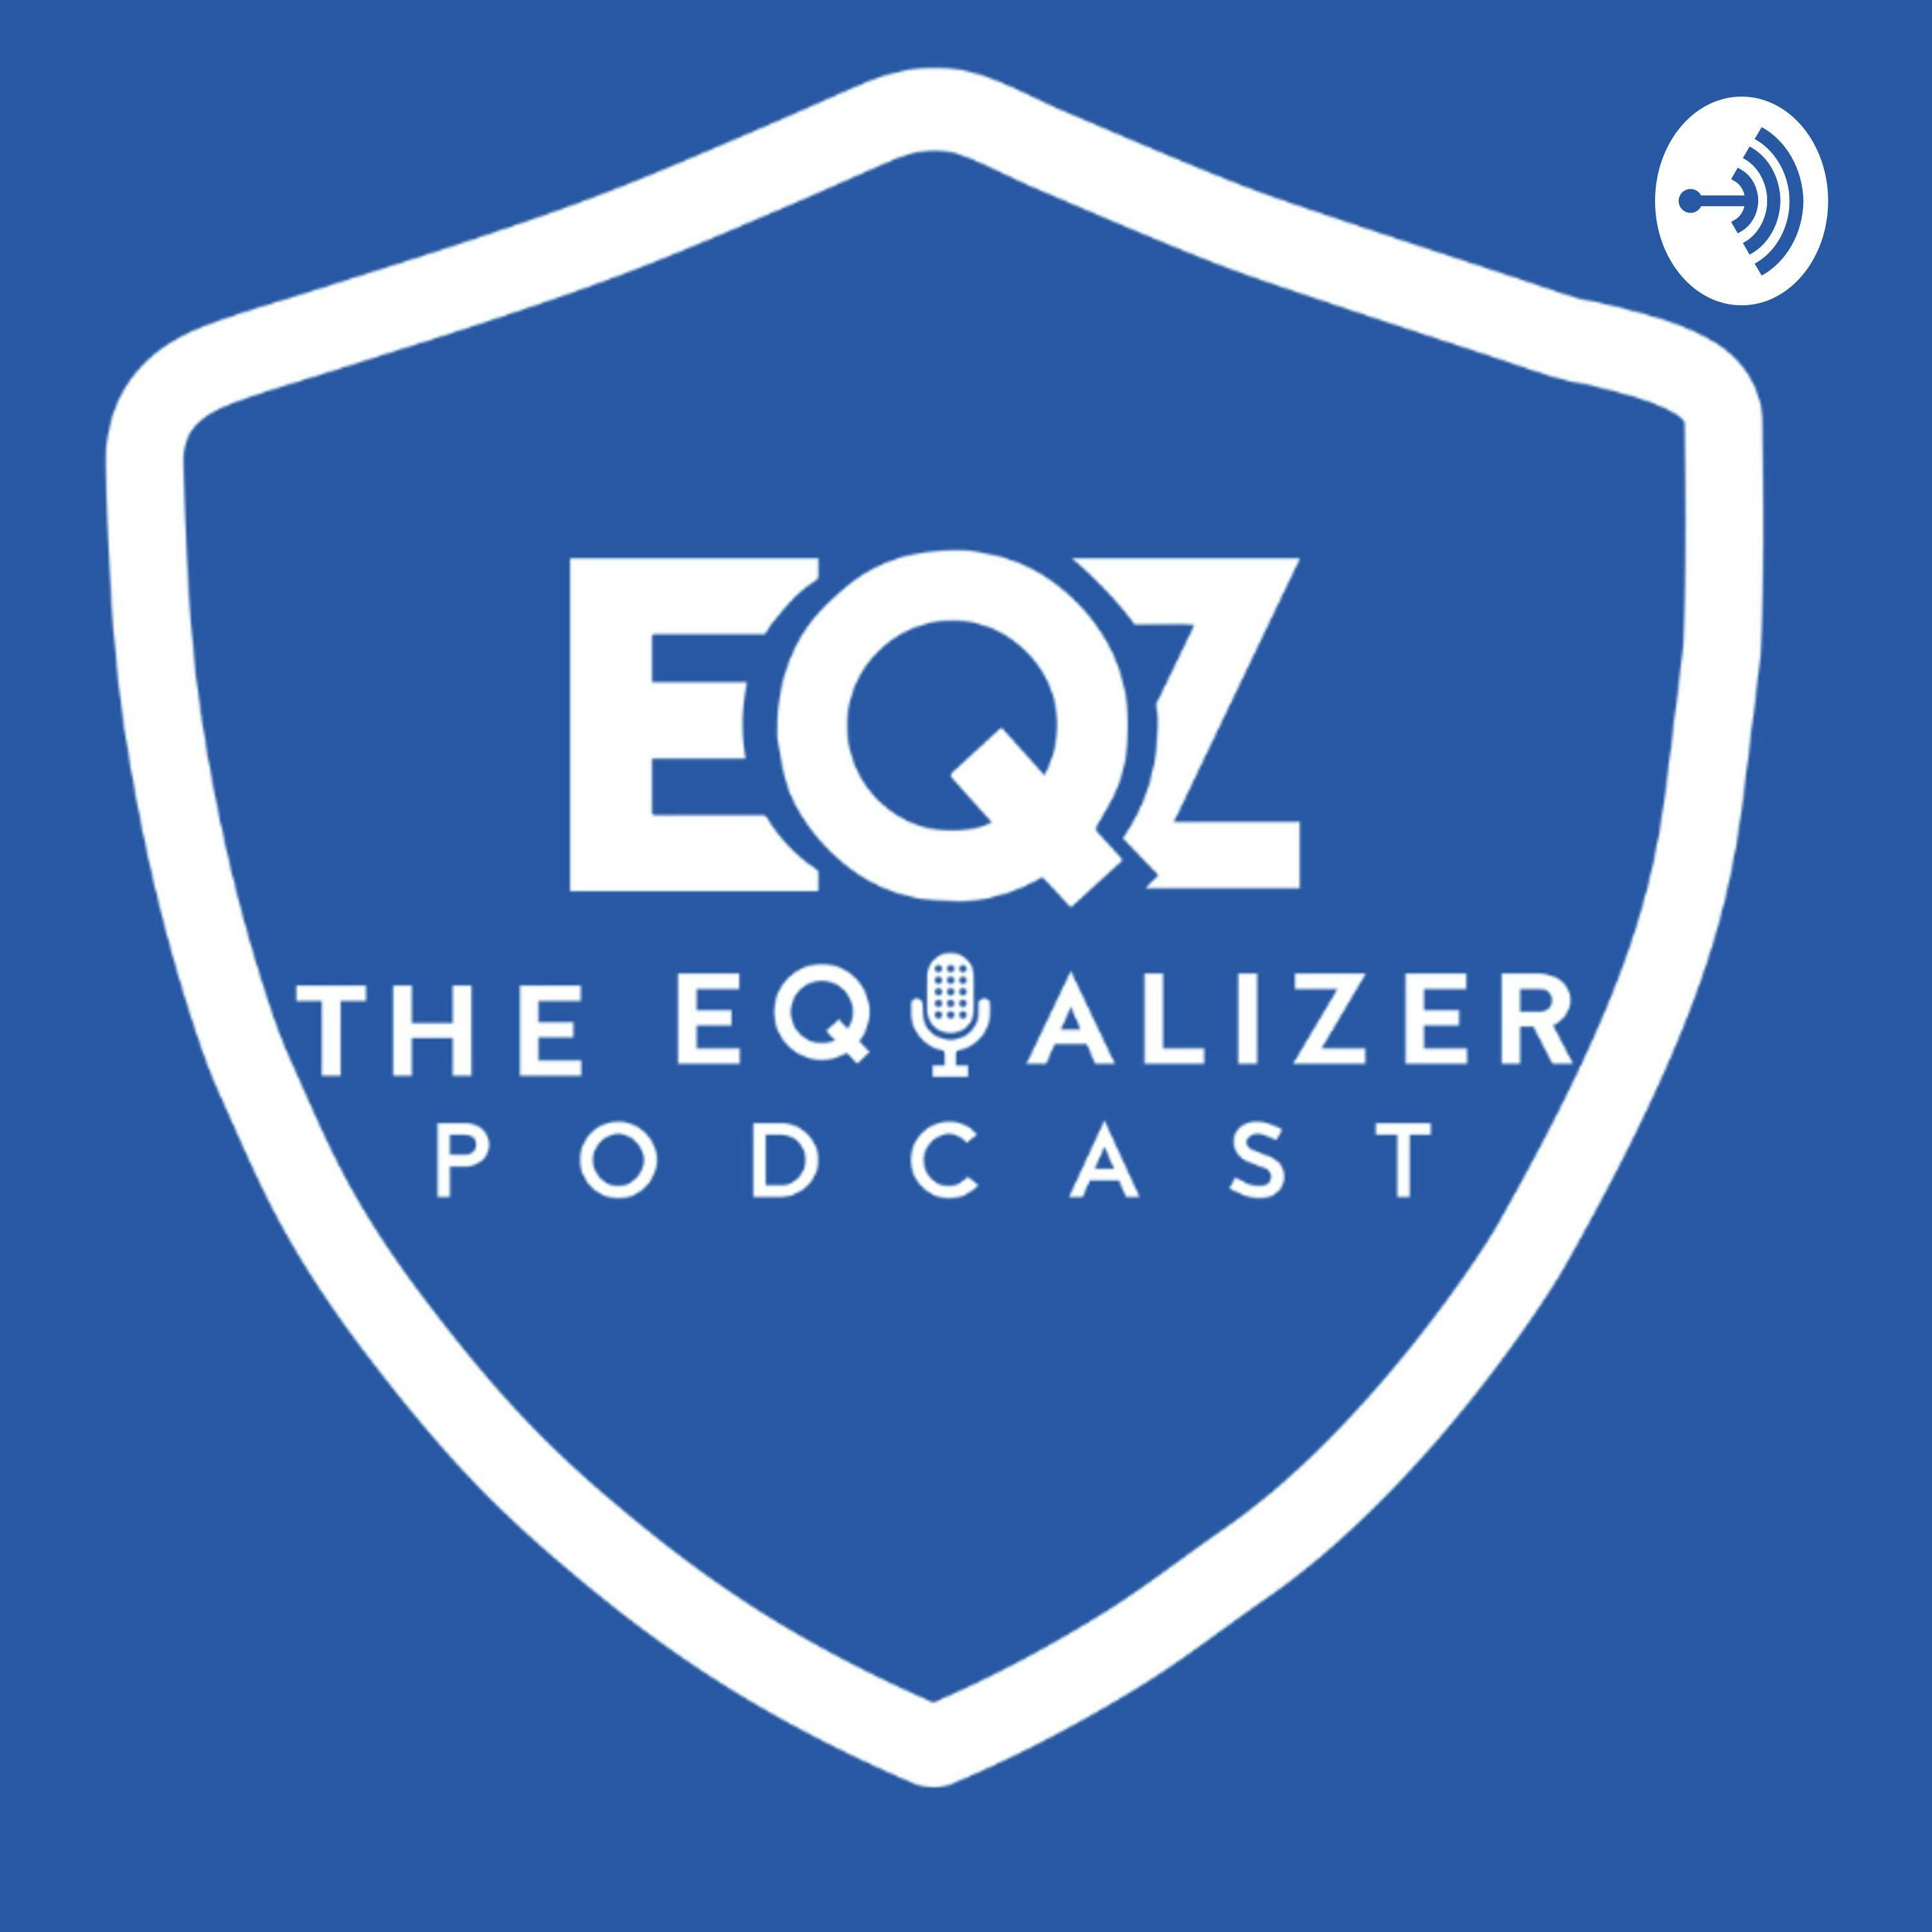 The Equalizer Podcast